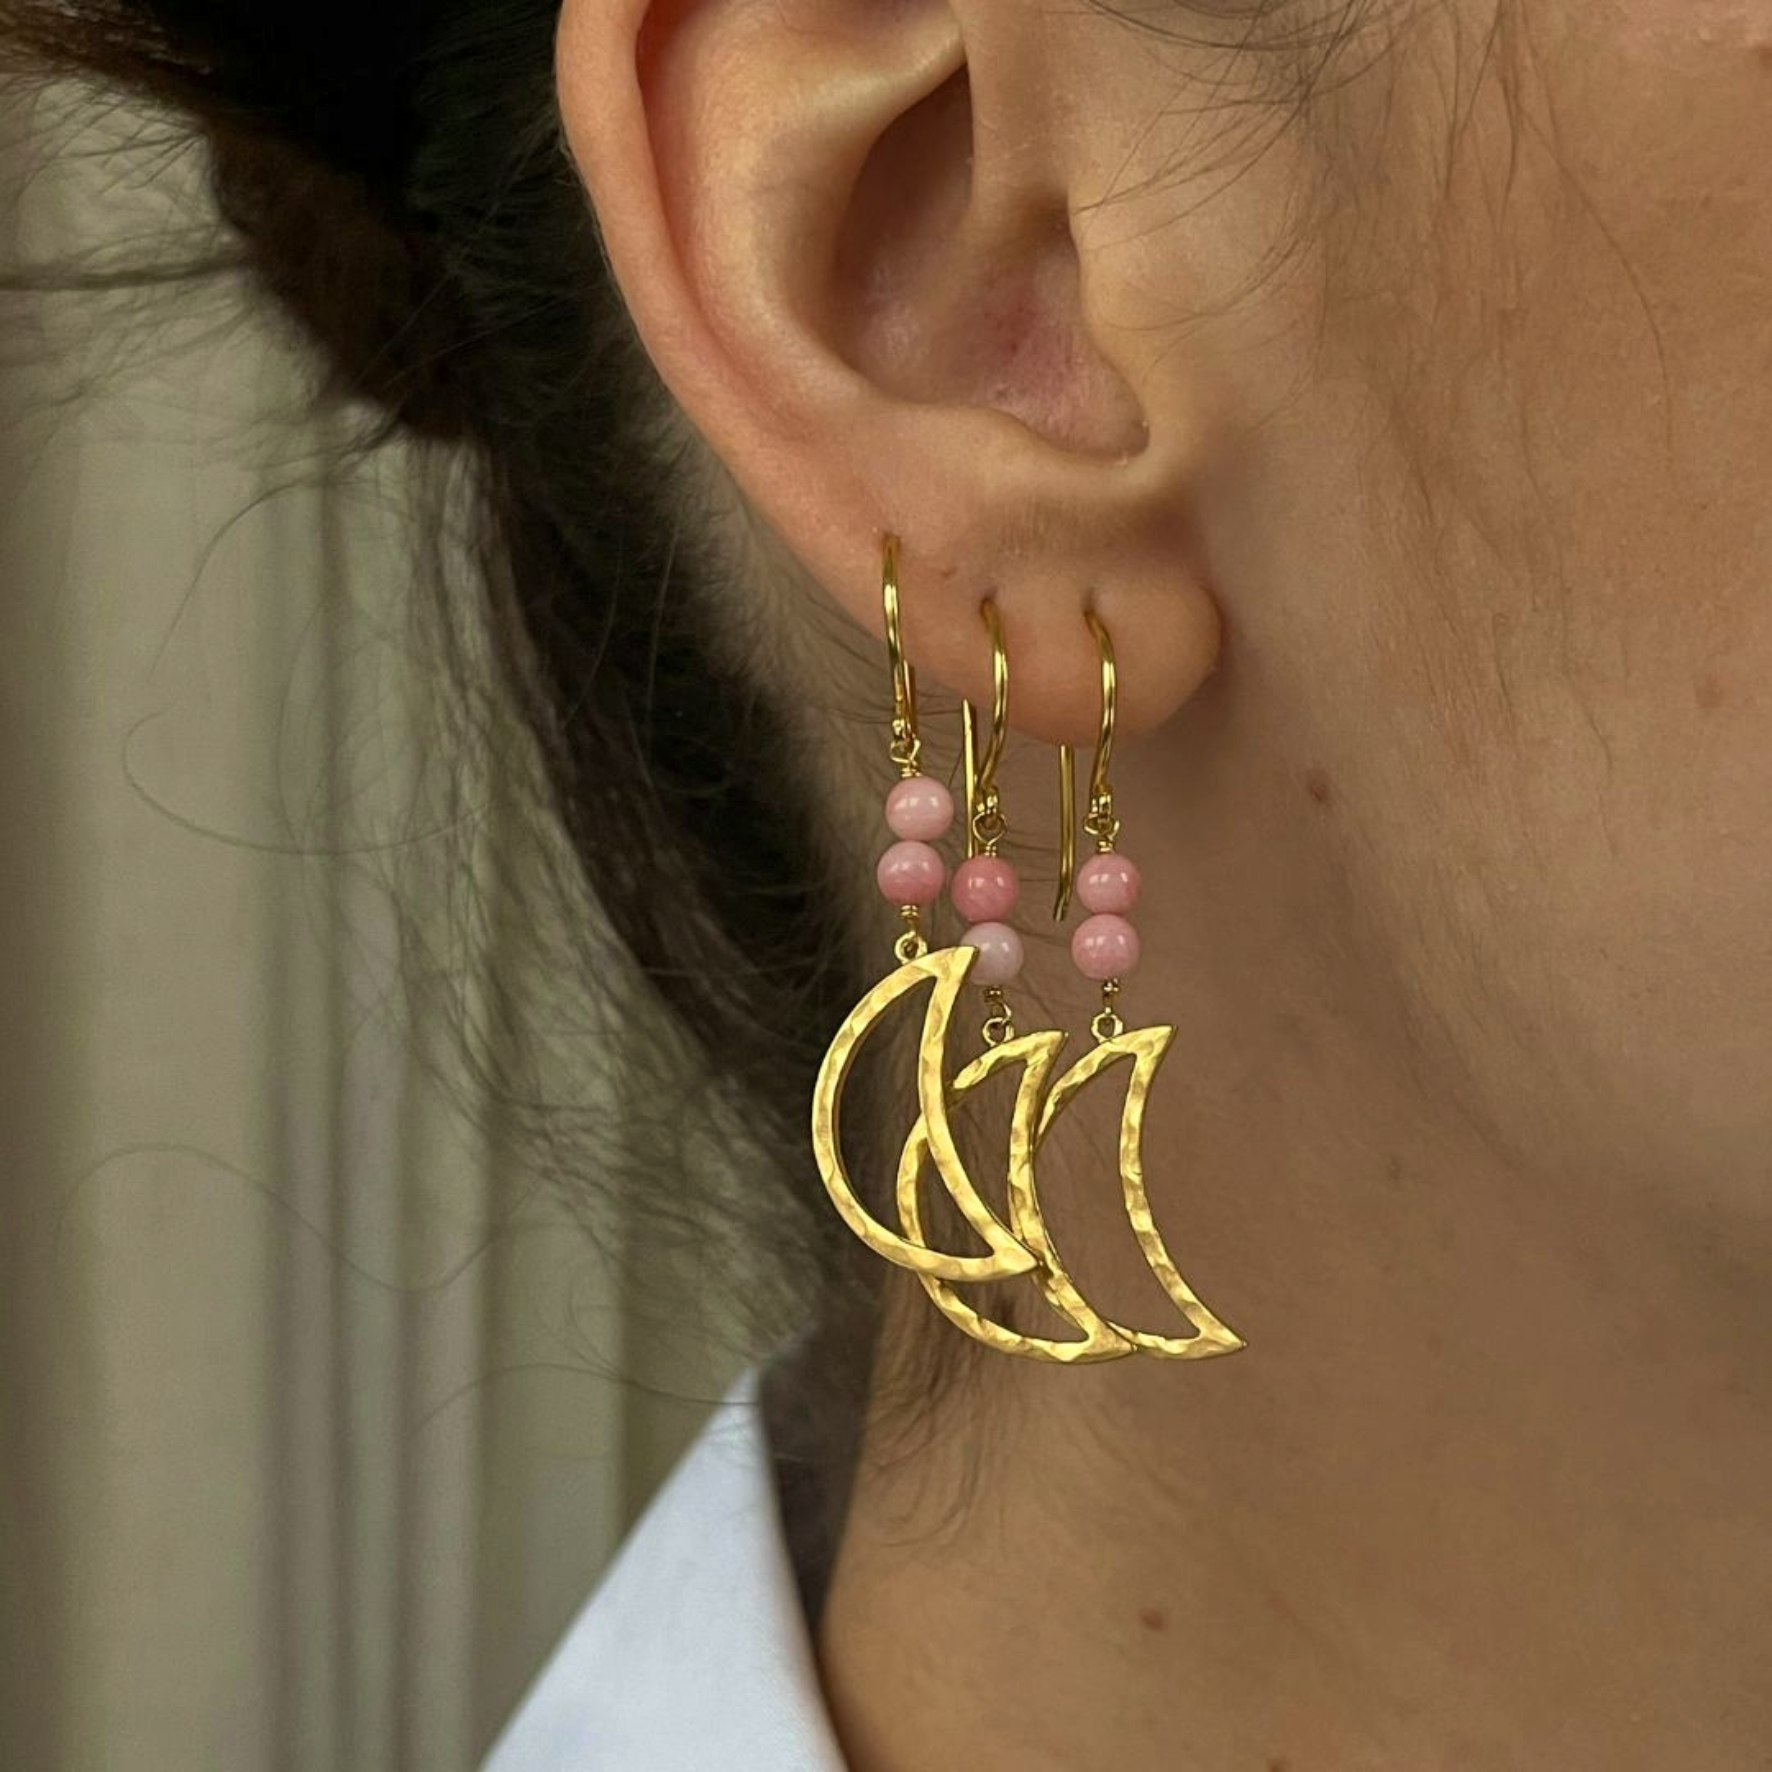 Big Bella Moon Earring Coral from STINE A Jewelry in Goldplated Silver Sterling 925